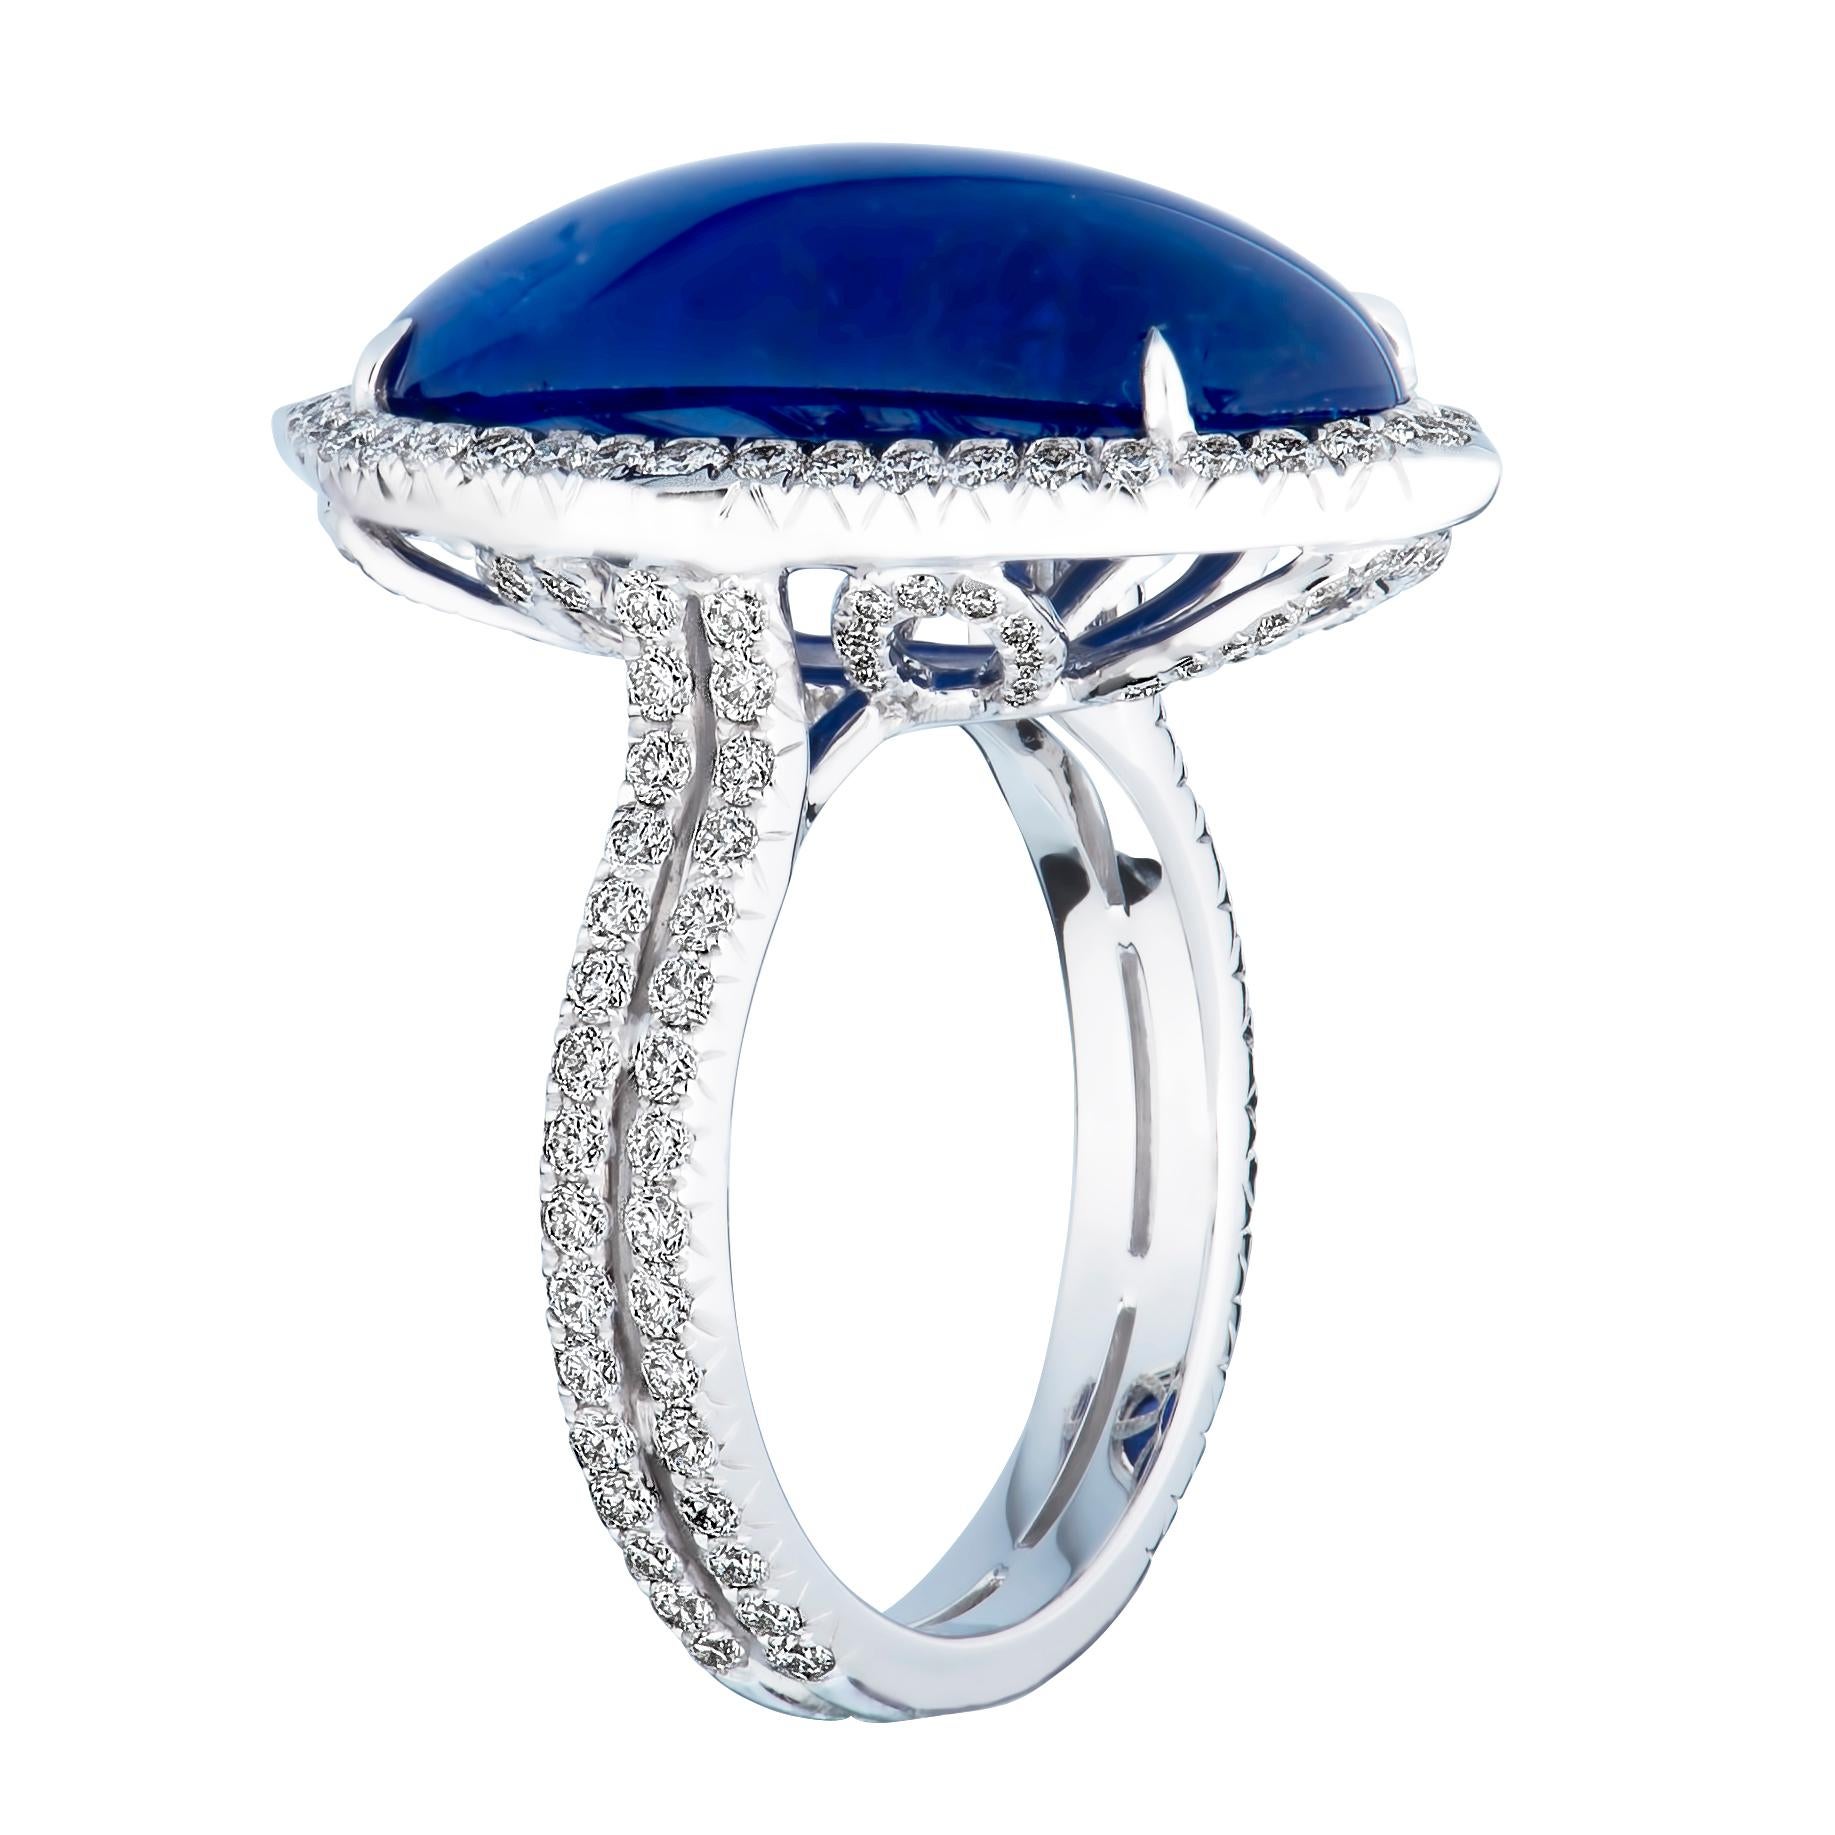 Oval Cut 13.91 Carat Unheated Blue Cabochon Burmese Sapphire Ring with Diamond Accents